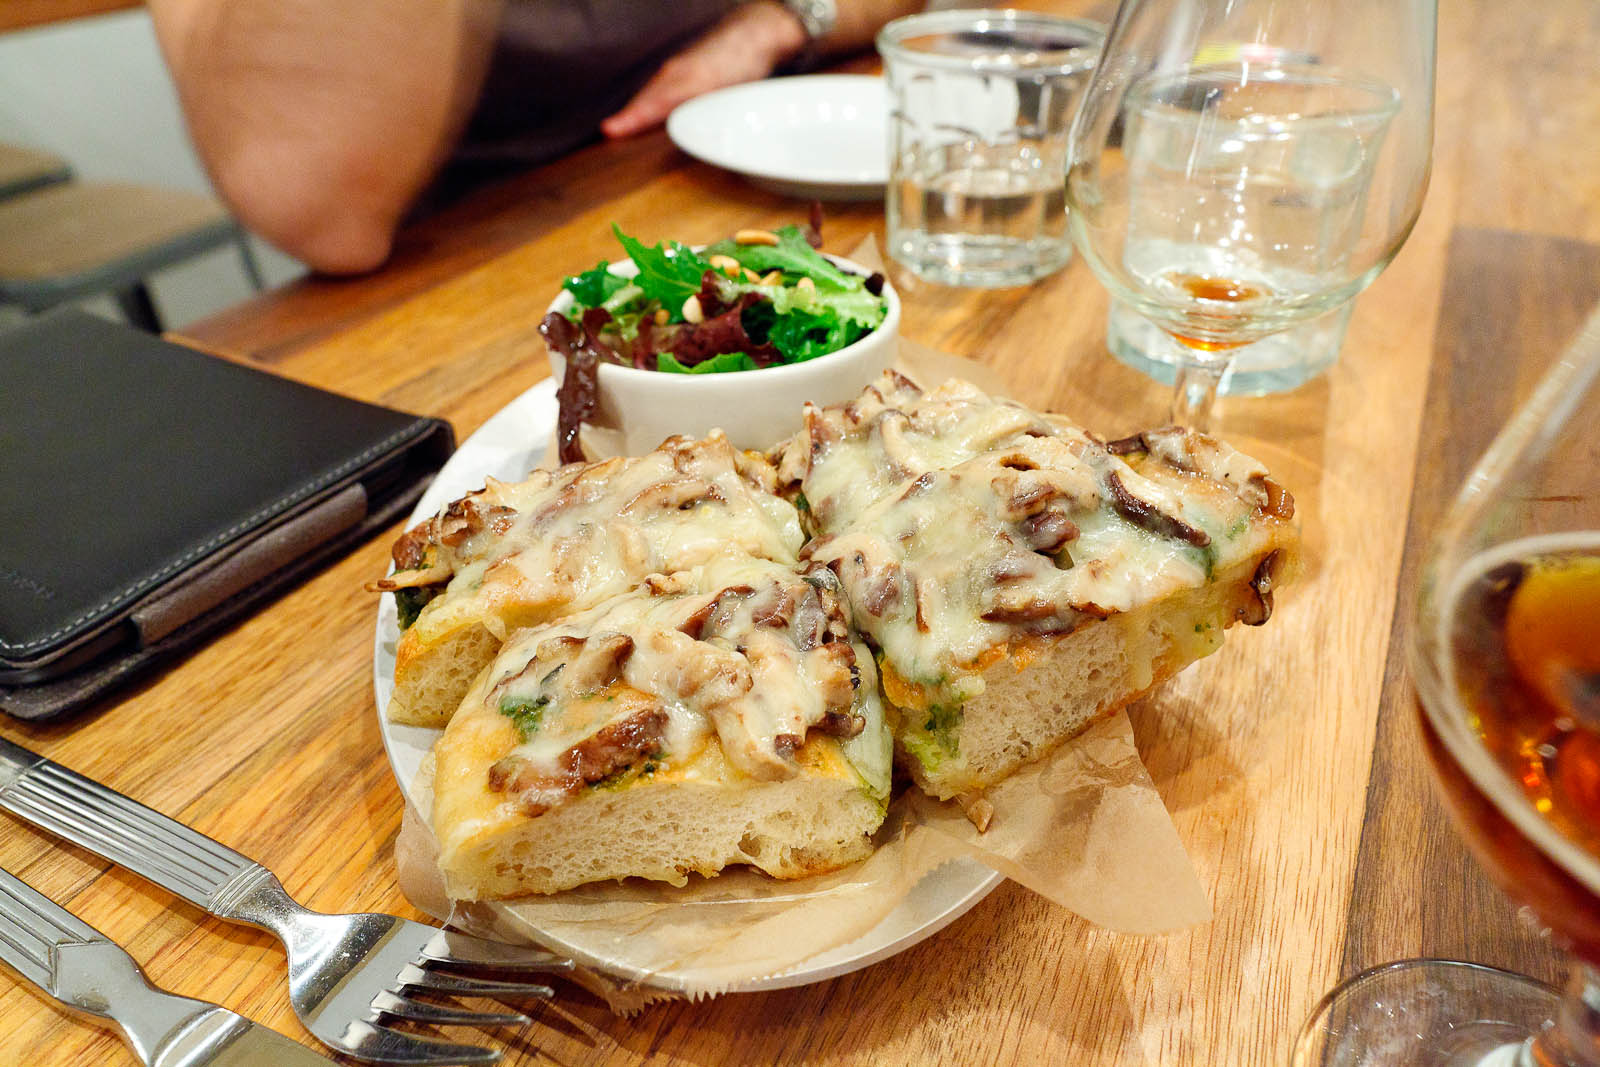 Fontina Val d'Aosta - Marinated mushrooms and basil pesto open-face on focaccia with green salad and toasted pine nuts ($11)